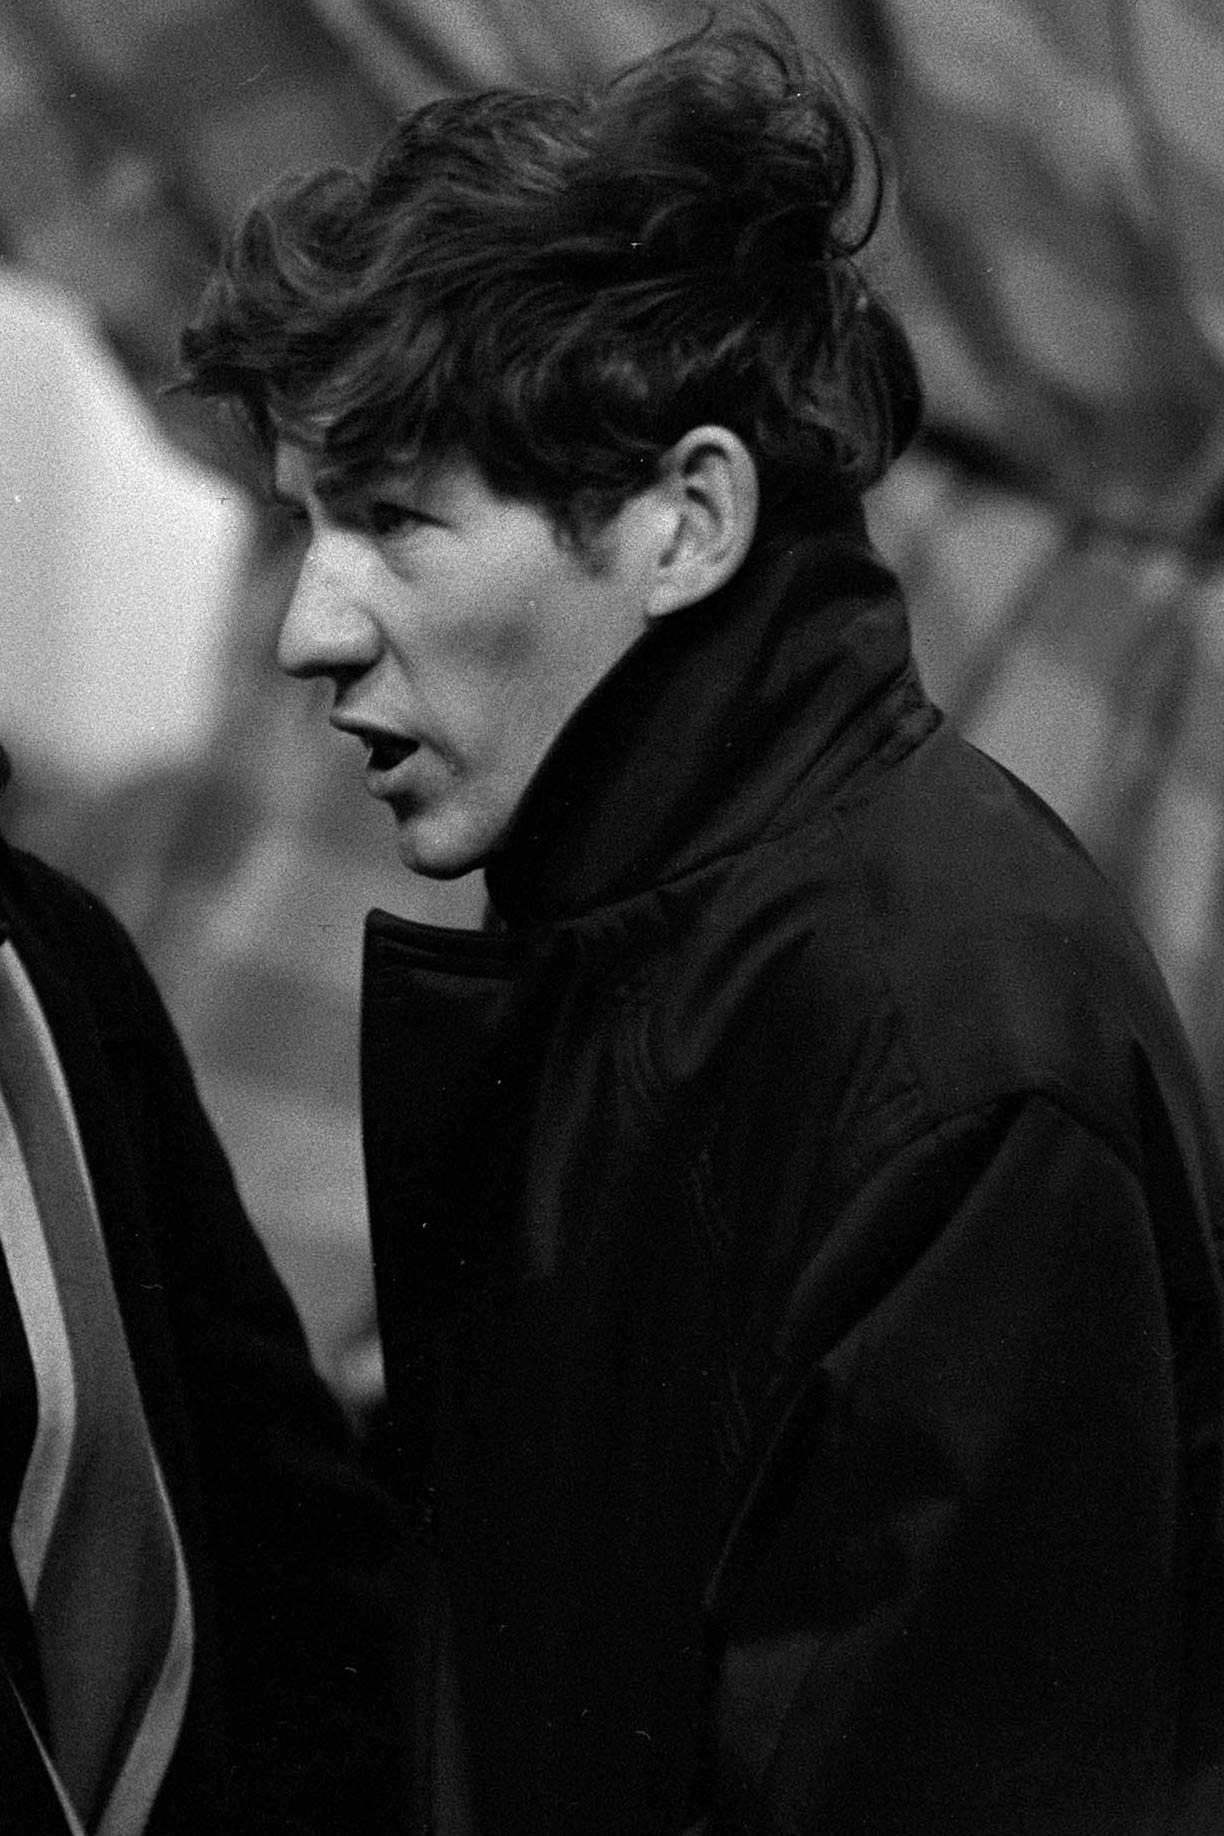 1964. British stage and screen actress Lynn Redgrave and actor Ian McKellen in a scene from "Sunday out of Season".